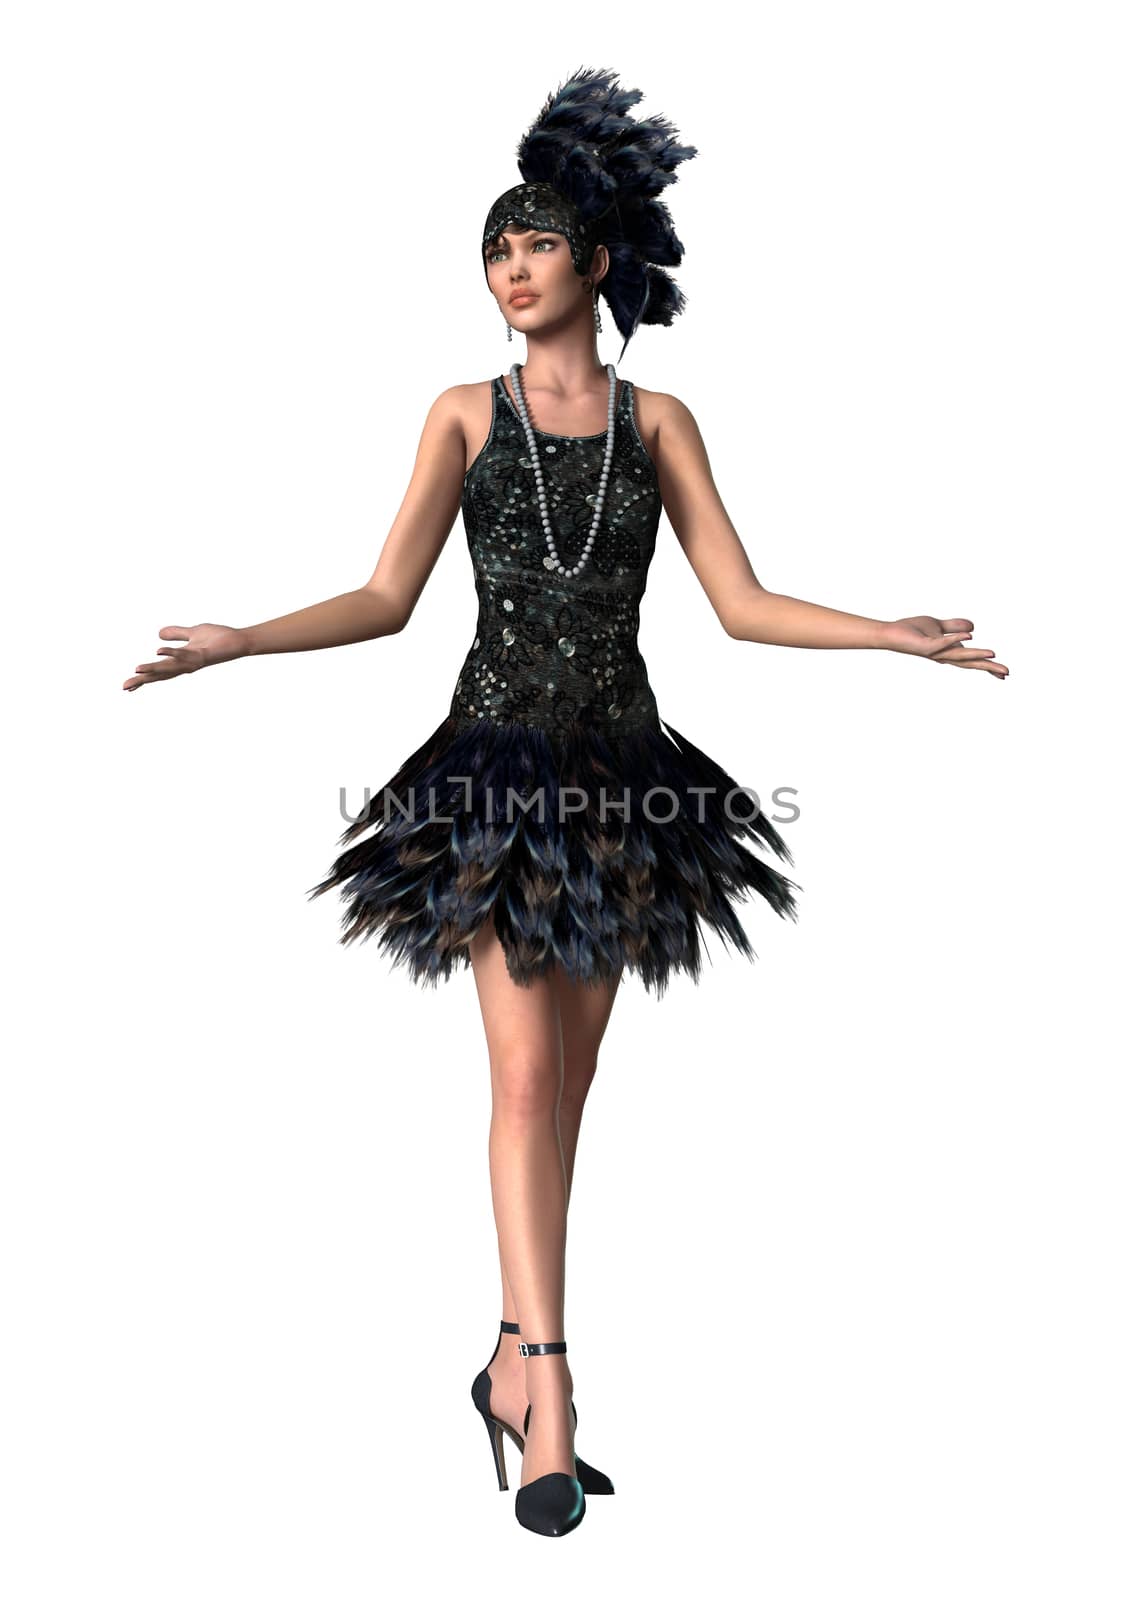 3D digital render of a beatiful vintage woman wearing 1920s style clothing isolated on white background